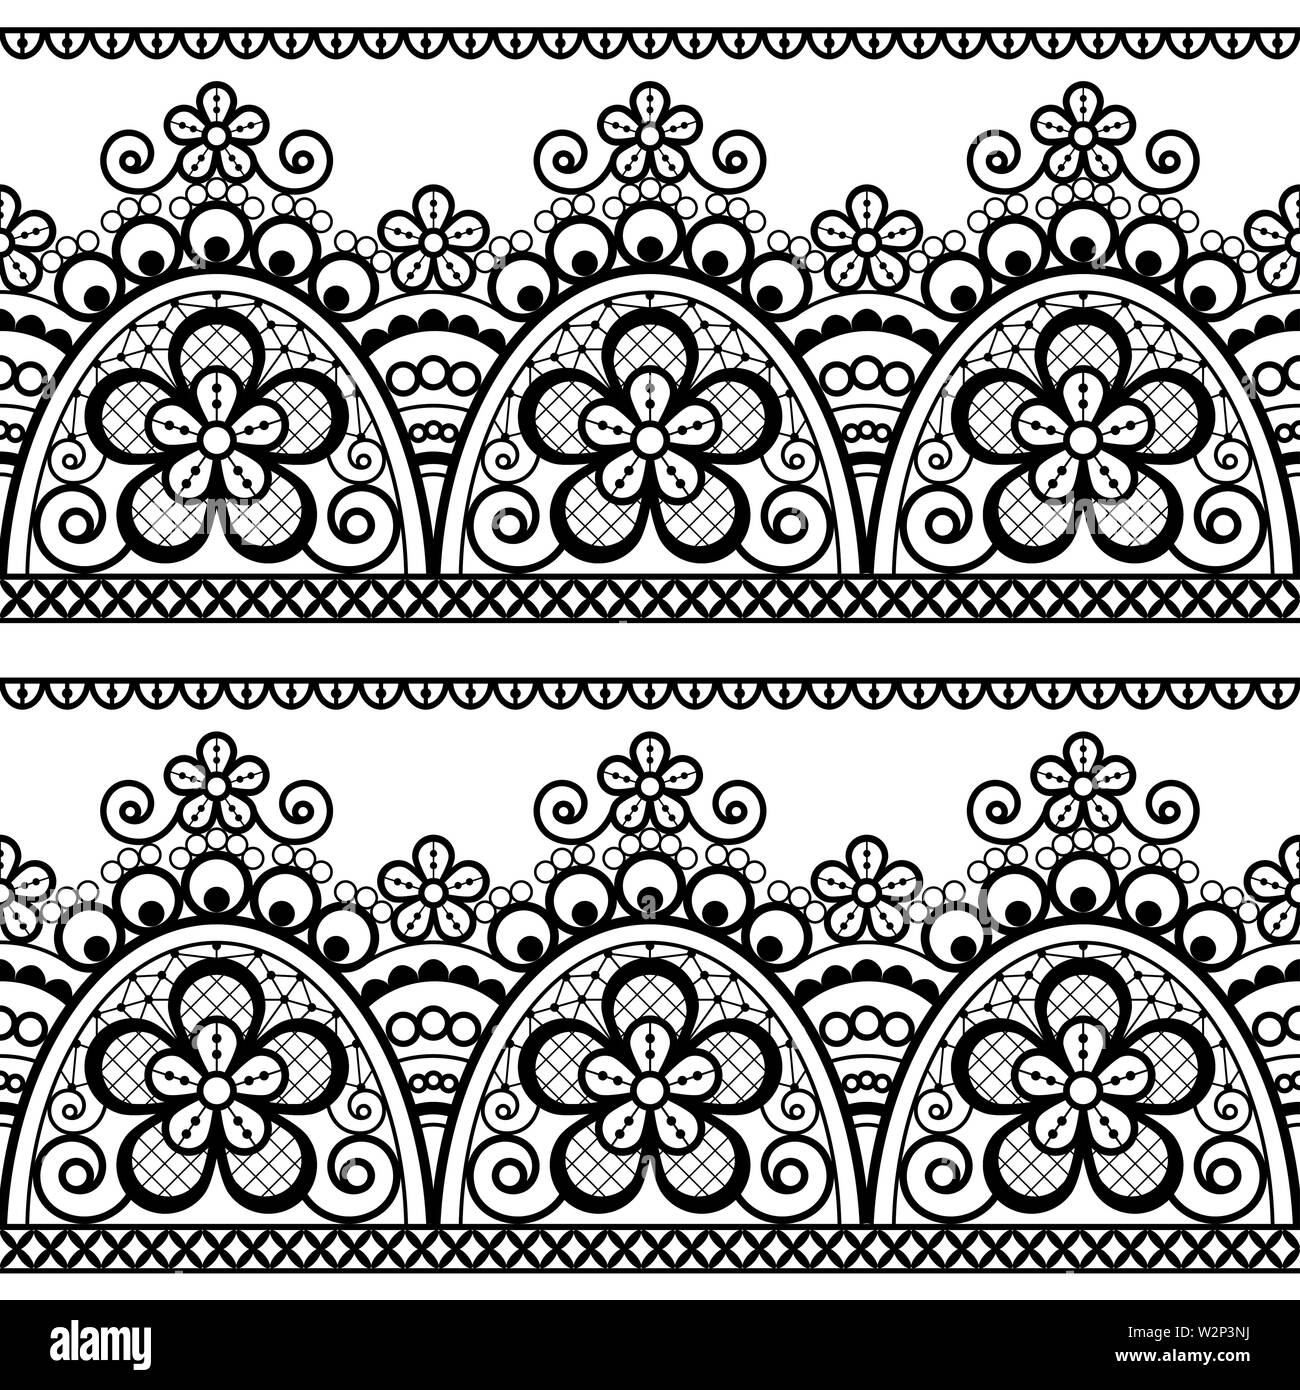 Intricate Black Lace Pattern On A White Background Stock Photo